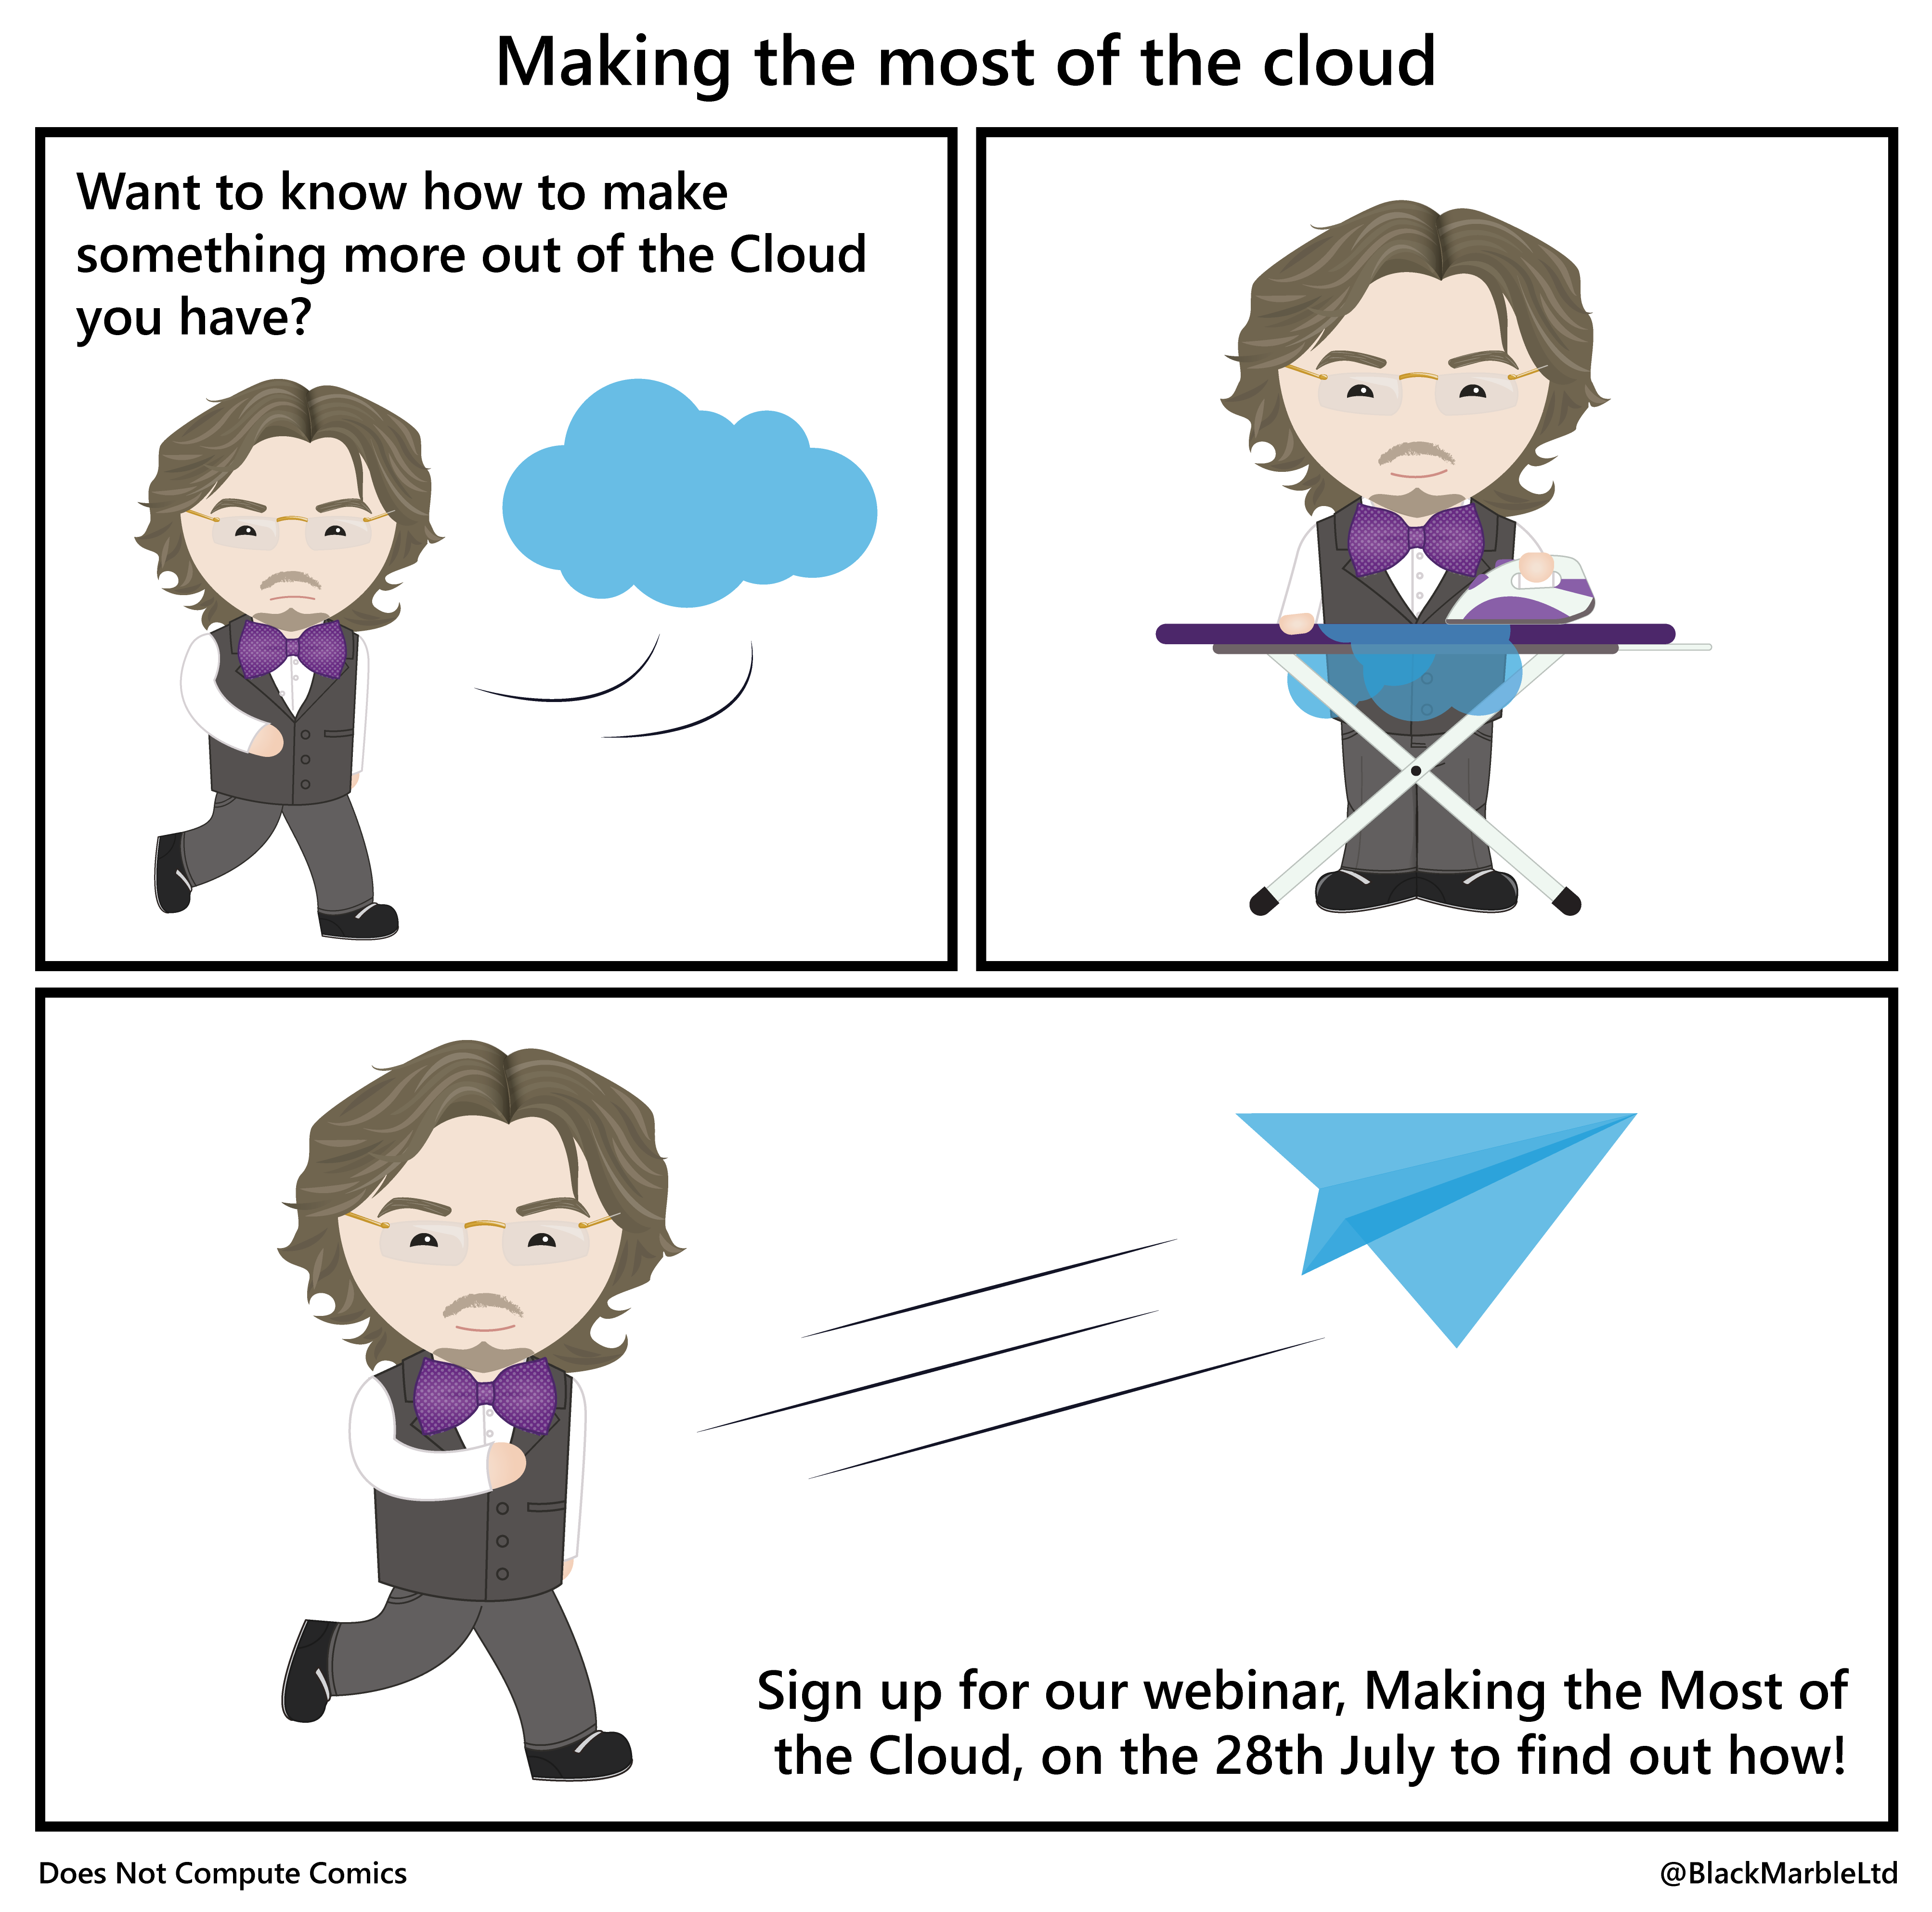 Making the most of the Cloud